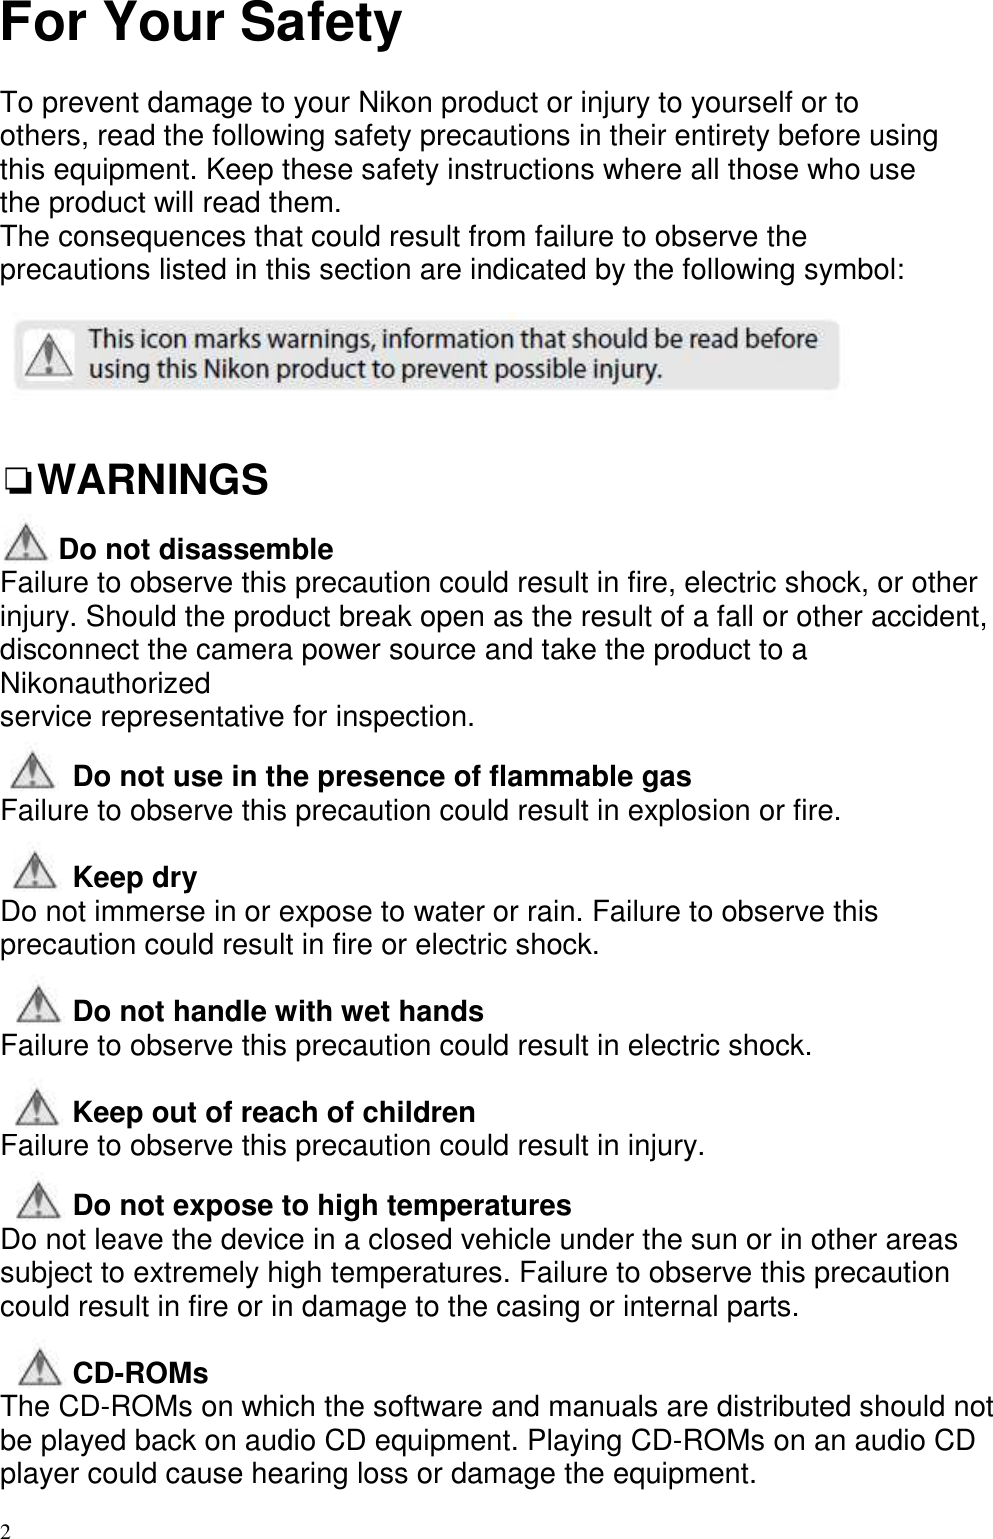   2  For Your Safety  To prevent damage to your Nikon product or injury to yourself or to others, read the following safety precautions in their entirety before using this equipment. Keep these safety instructions where all those who use the product will read them. The consequences that could result from failure to observe the precautions listed in this section are indicated by the following symbol:     ❏WARNINGS       Do not disassemble Failure to observe this precaution could result in fire, electric shock, or other injury. Should the product break open as the result of a fall or other accident, disconnect the camera power source and take the product to a Nikonauthorized service representative for inspection.  Do not use in the presence of flammable gas Failure to observe this precaution could result in explosion or fire.  Keep dry Do not immerse in or expose to water or rain. Failure to observe this precaution could result in fire or electric shock.  Do not handle with wet hands Failure to observe this precaution could result in electric shock.  Keep out of reach of children Failure to observe this precaution could result in injury.  Do not expose to high temperatures Do not leave the device in a closed vehicle under the sun or in other areas subject to extremely high temperatures. Failure to observe this precaution could result in fire or in damage to the casing or internal parts.  CD-ROMs The CD-ROMs on which the software and manuals are distributed should not be played back on audio CD equipment. Playing CD-ROMs on an audio CD player could cause hearing loss or damage the equipment. 